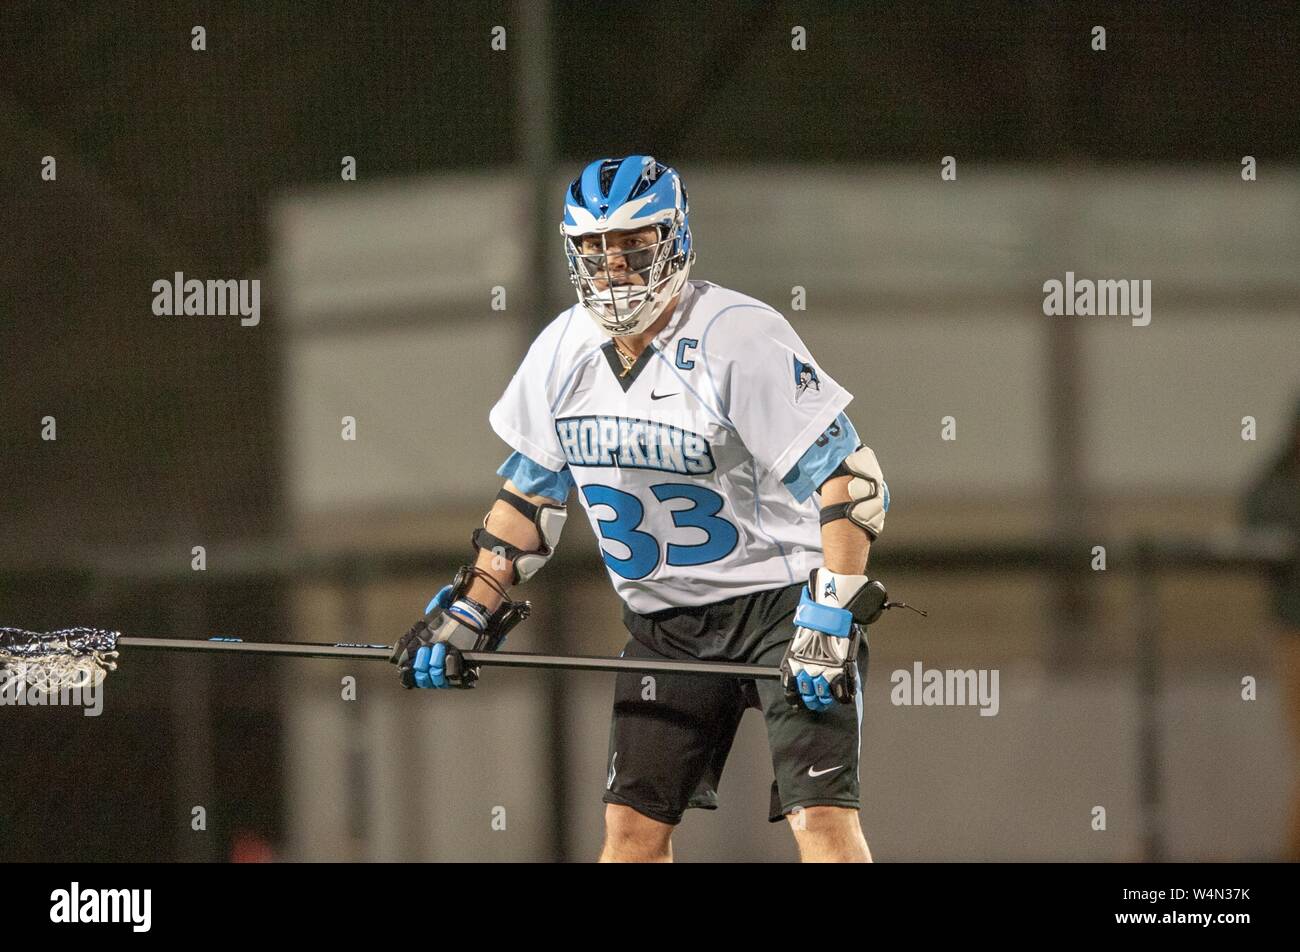 A Johns Hopkins Blue Jays Men's Lacrosse player stands ready with his stick while participating in a game at the Johns Hopkins University, Baltimore, Maryland, February 20, 2009. From the Homewood Photography Collection. () Stock Photo